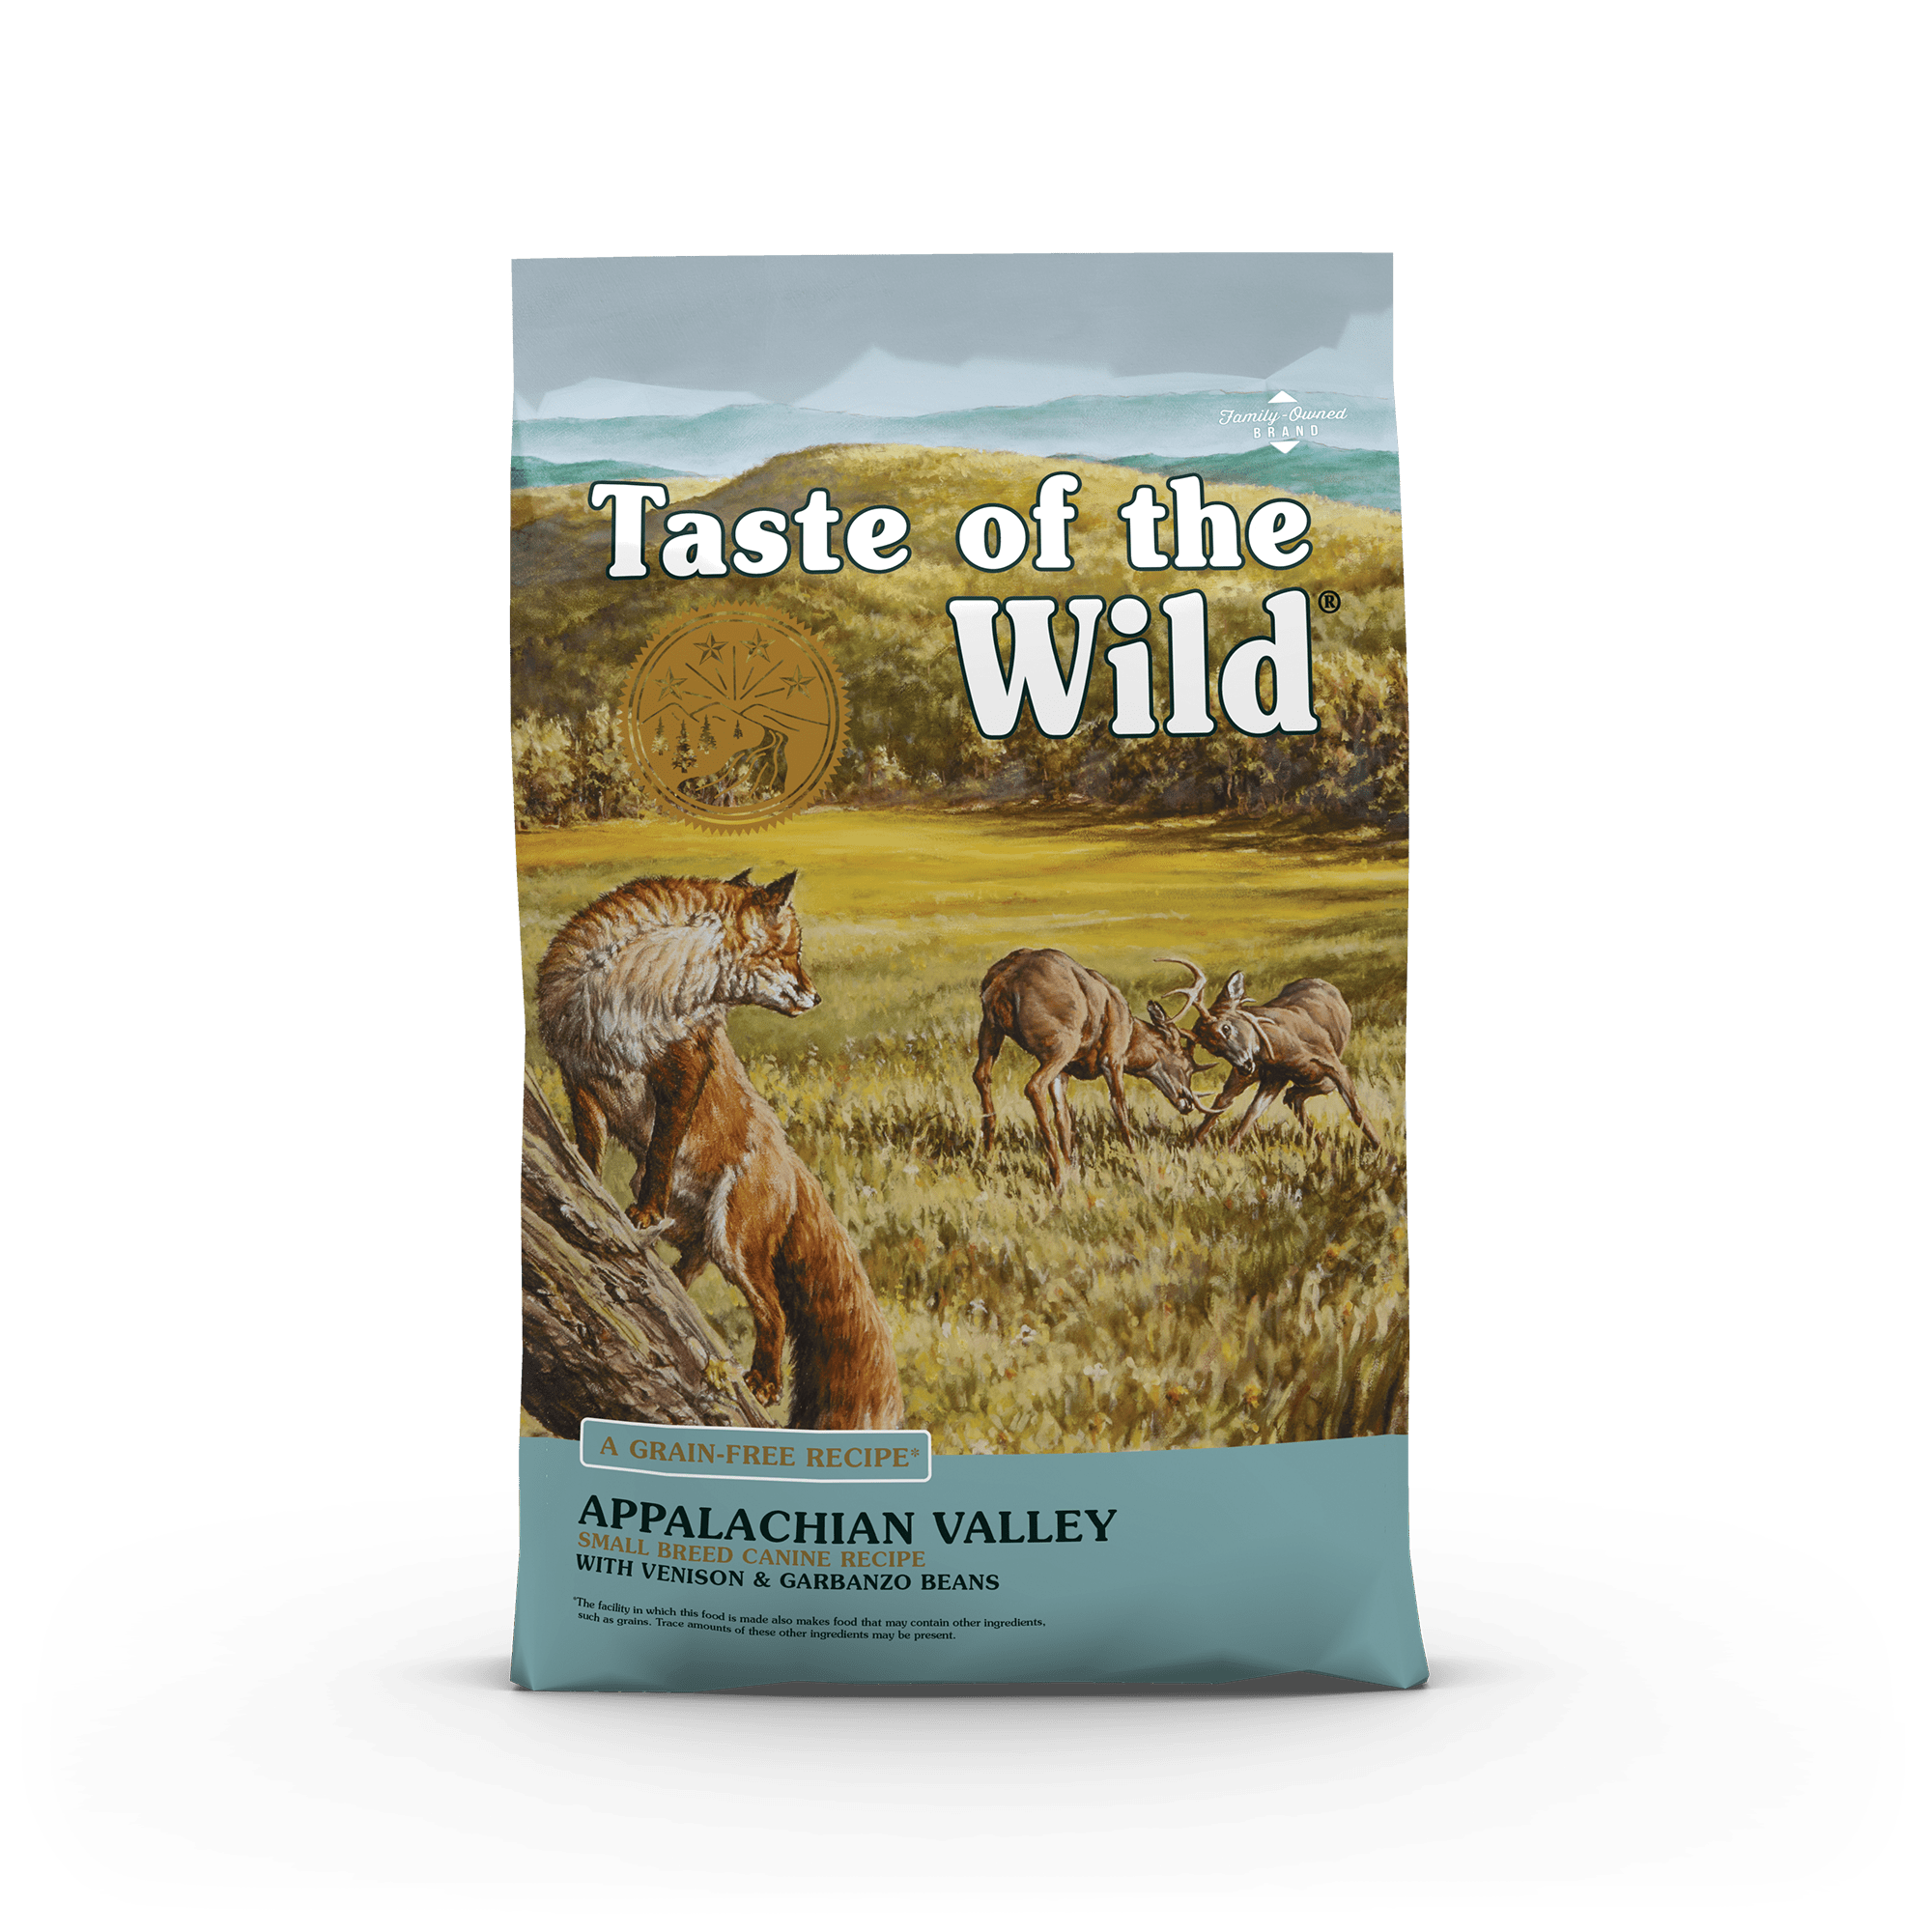 Taste of the Wild Grain-Free Appalachian Valley Small Breed Canine Recipe with Venison & Garbanzo Beans package